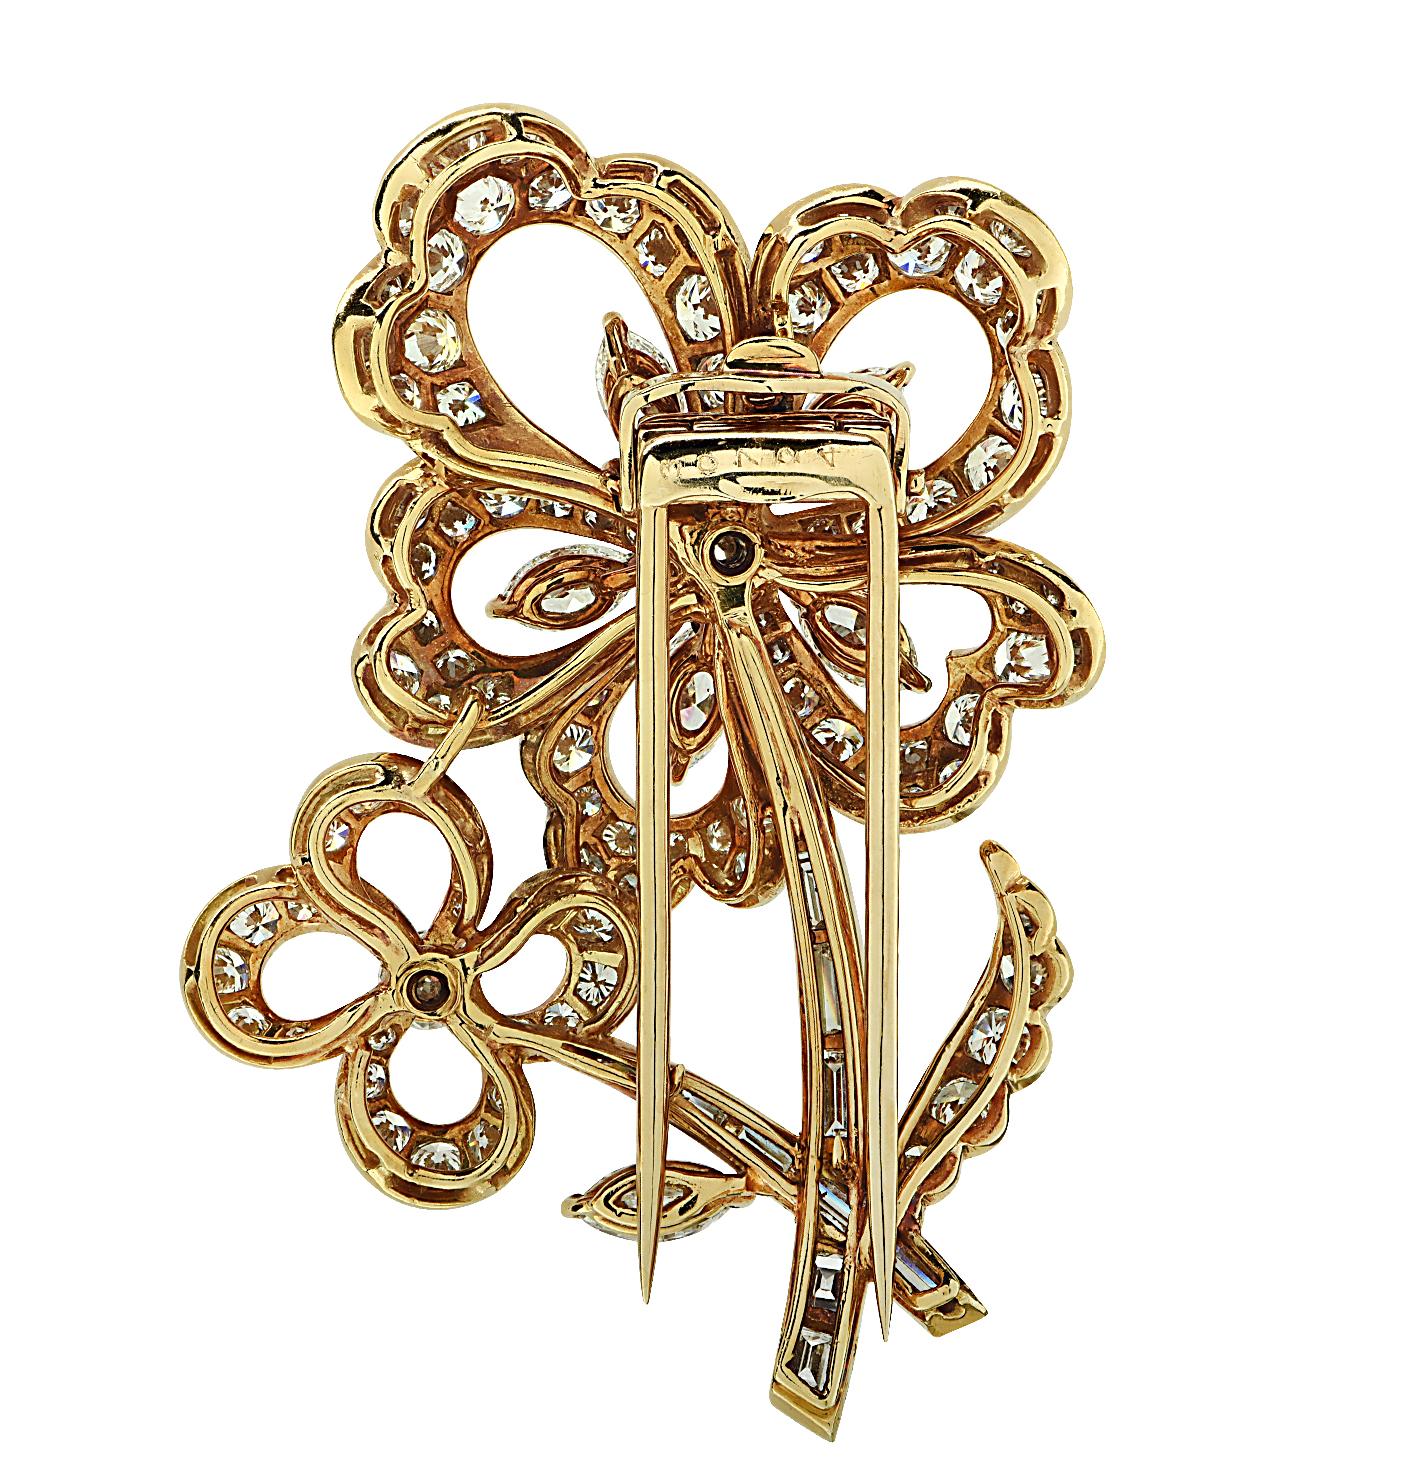 From the esteemed House of Cartier emerges a magnificent brooch, artfully sculpted from 18-karat yellow gold. This exquisite piece boasts a medley of 118 marquise, round brilliant, and baguette-cut diamonds weighing 7.68 carats, F color, VS clarity,